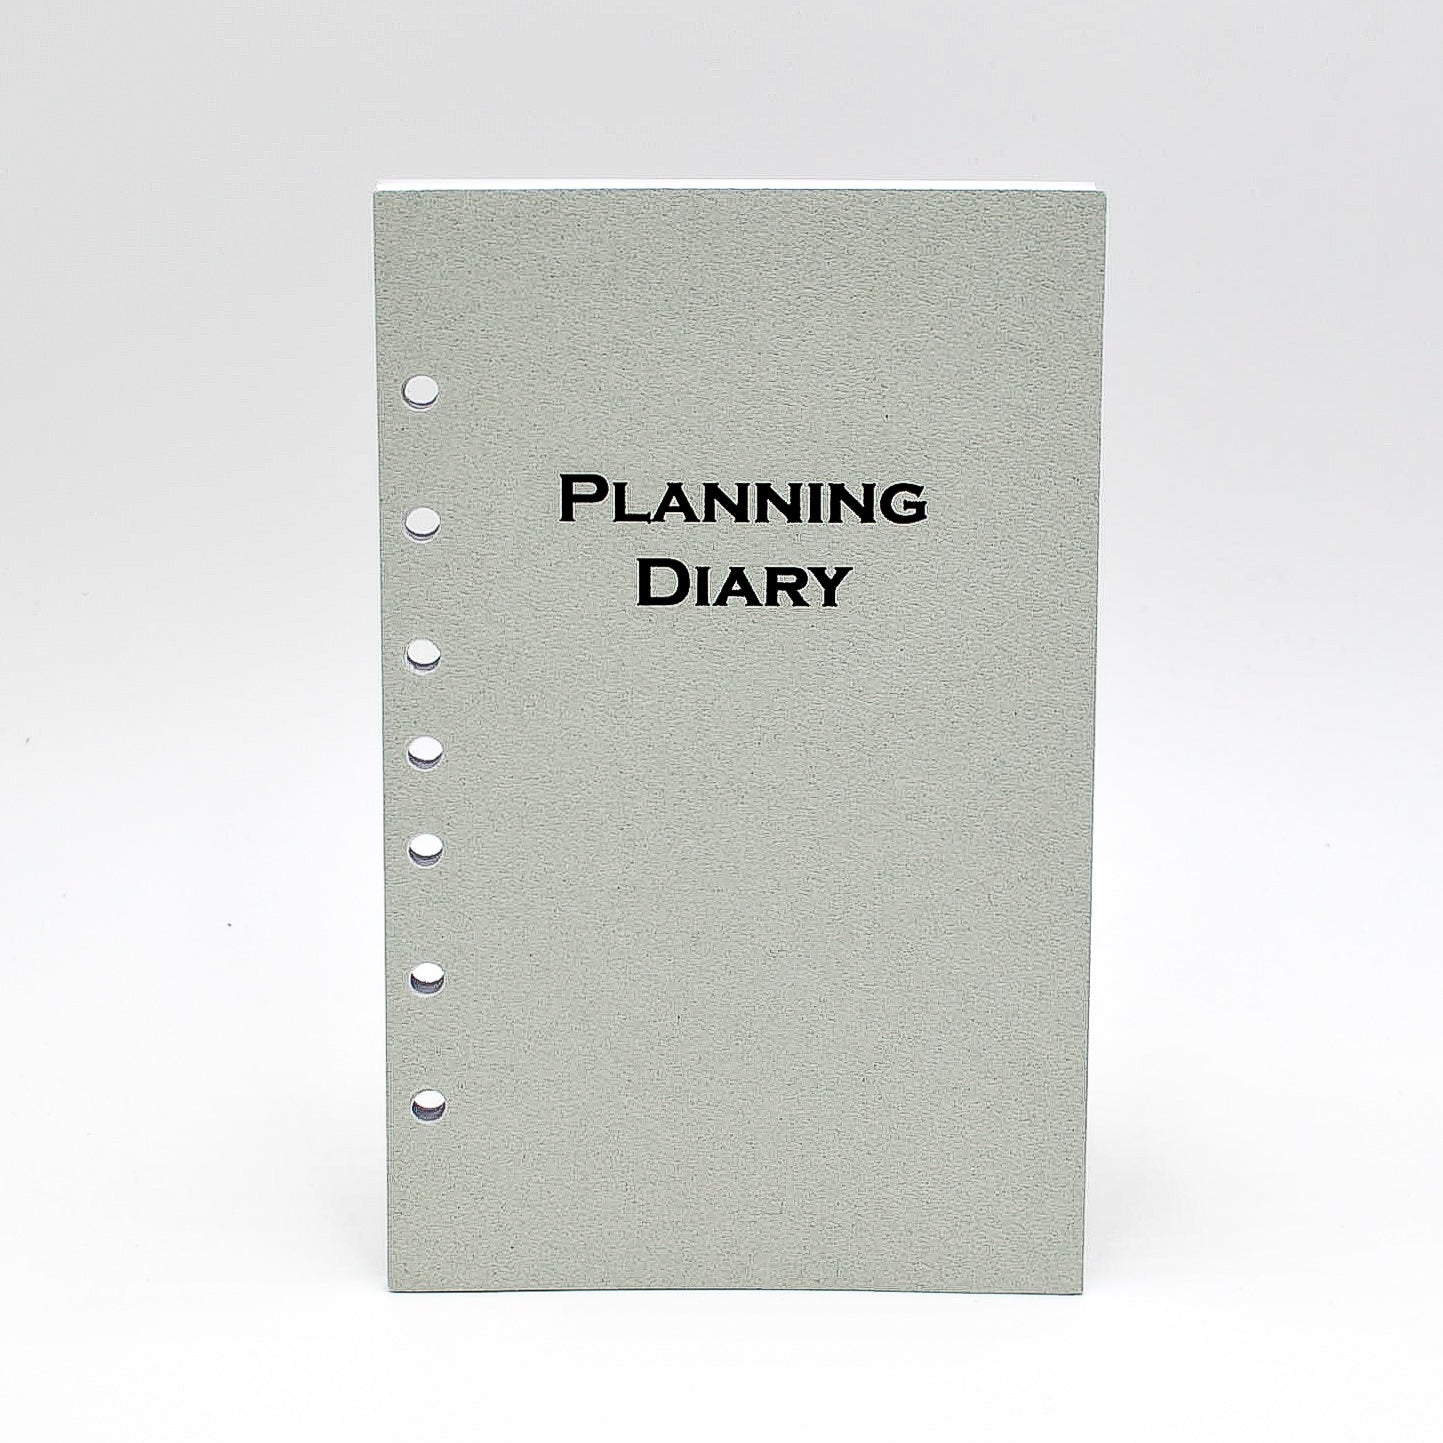 2020 calendar McCarthy Planner- Item MP58P7 12 Month Planner  White paper. Size 8-1/2"X 5-1/2" 7 -Ring 144 pages; Weekly and Monthly View Format. One agenda planner; two formats. Also includes a 3 Yearly View, 12 Monthly View, 52 Weekly View. And includes Advance Planning, Important Dates, International Holidays, Birthdays and Anniversaries, Weights and Measures, Weather, Interest Rates, Road and Air Miles...and more! Calendar refill only.  Made in the USA! loose leaf paper agenda refill insert organizer 